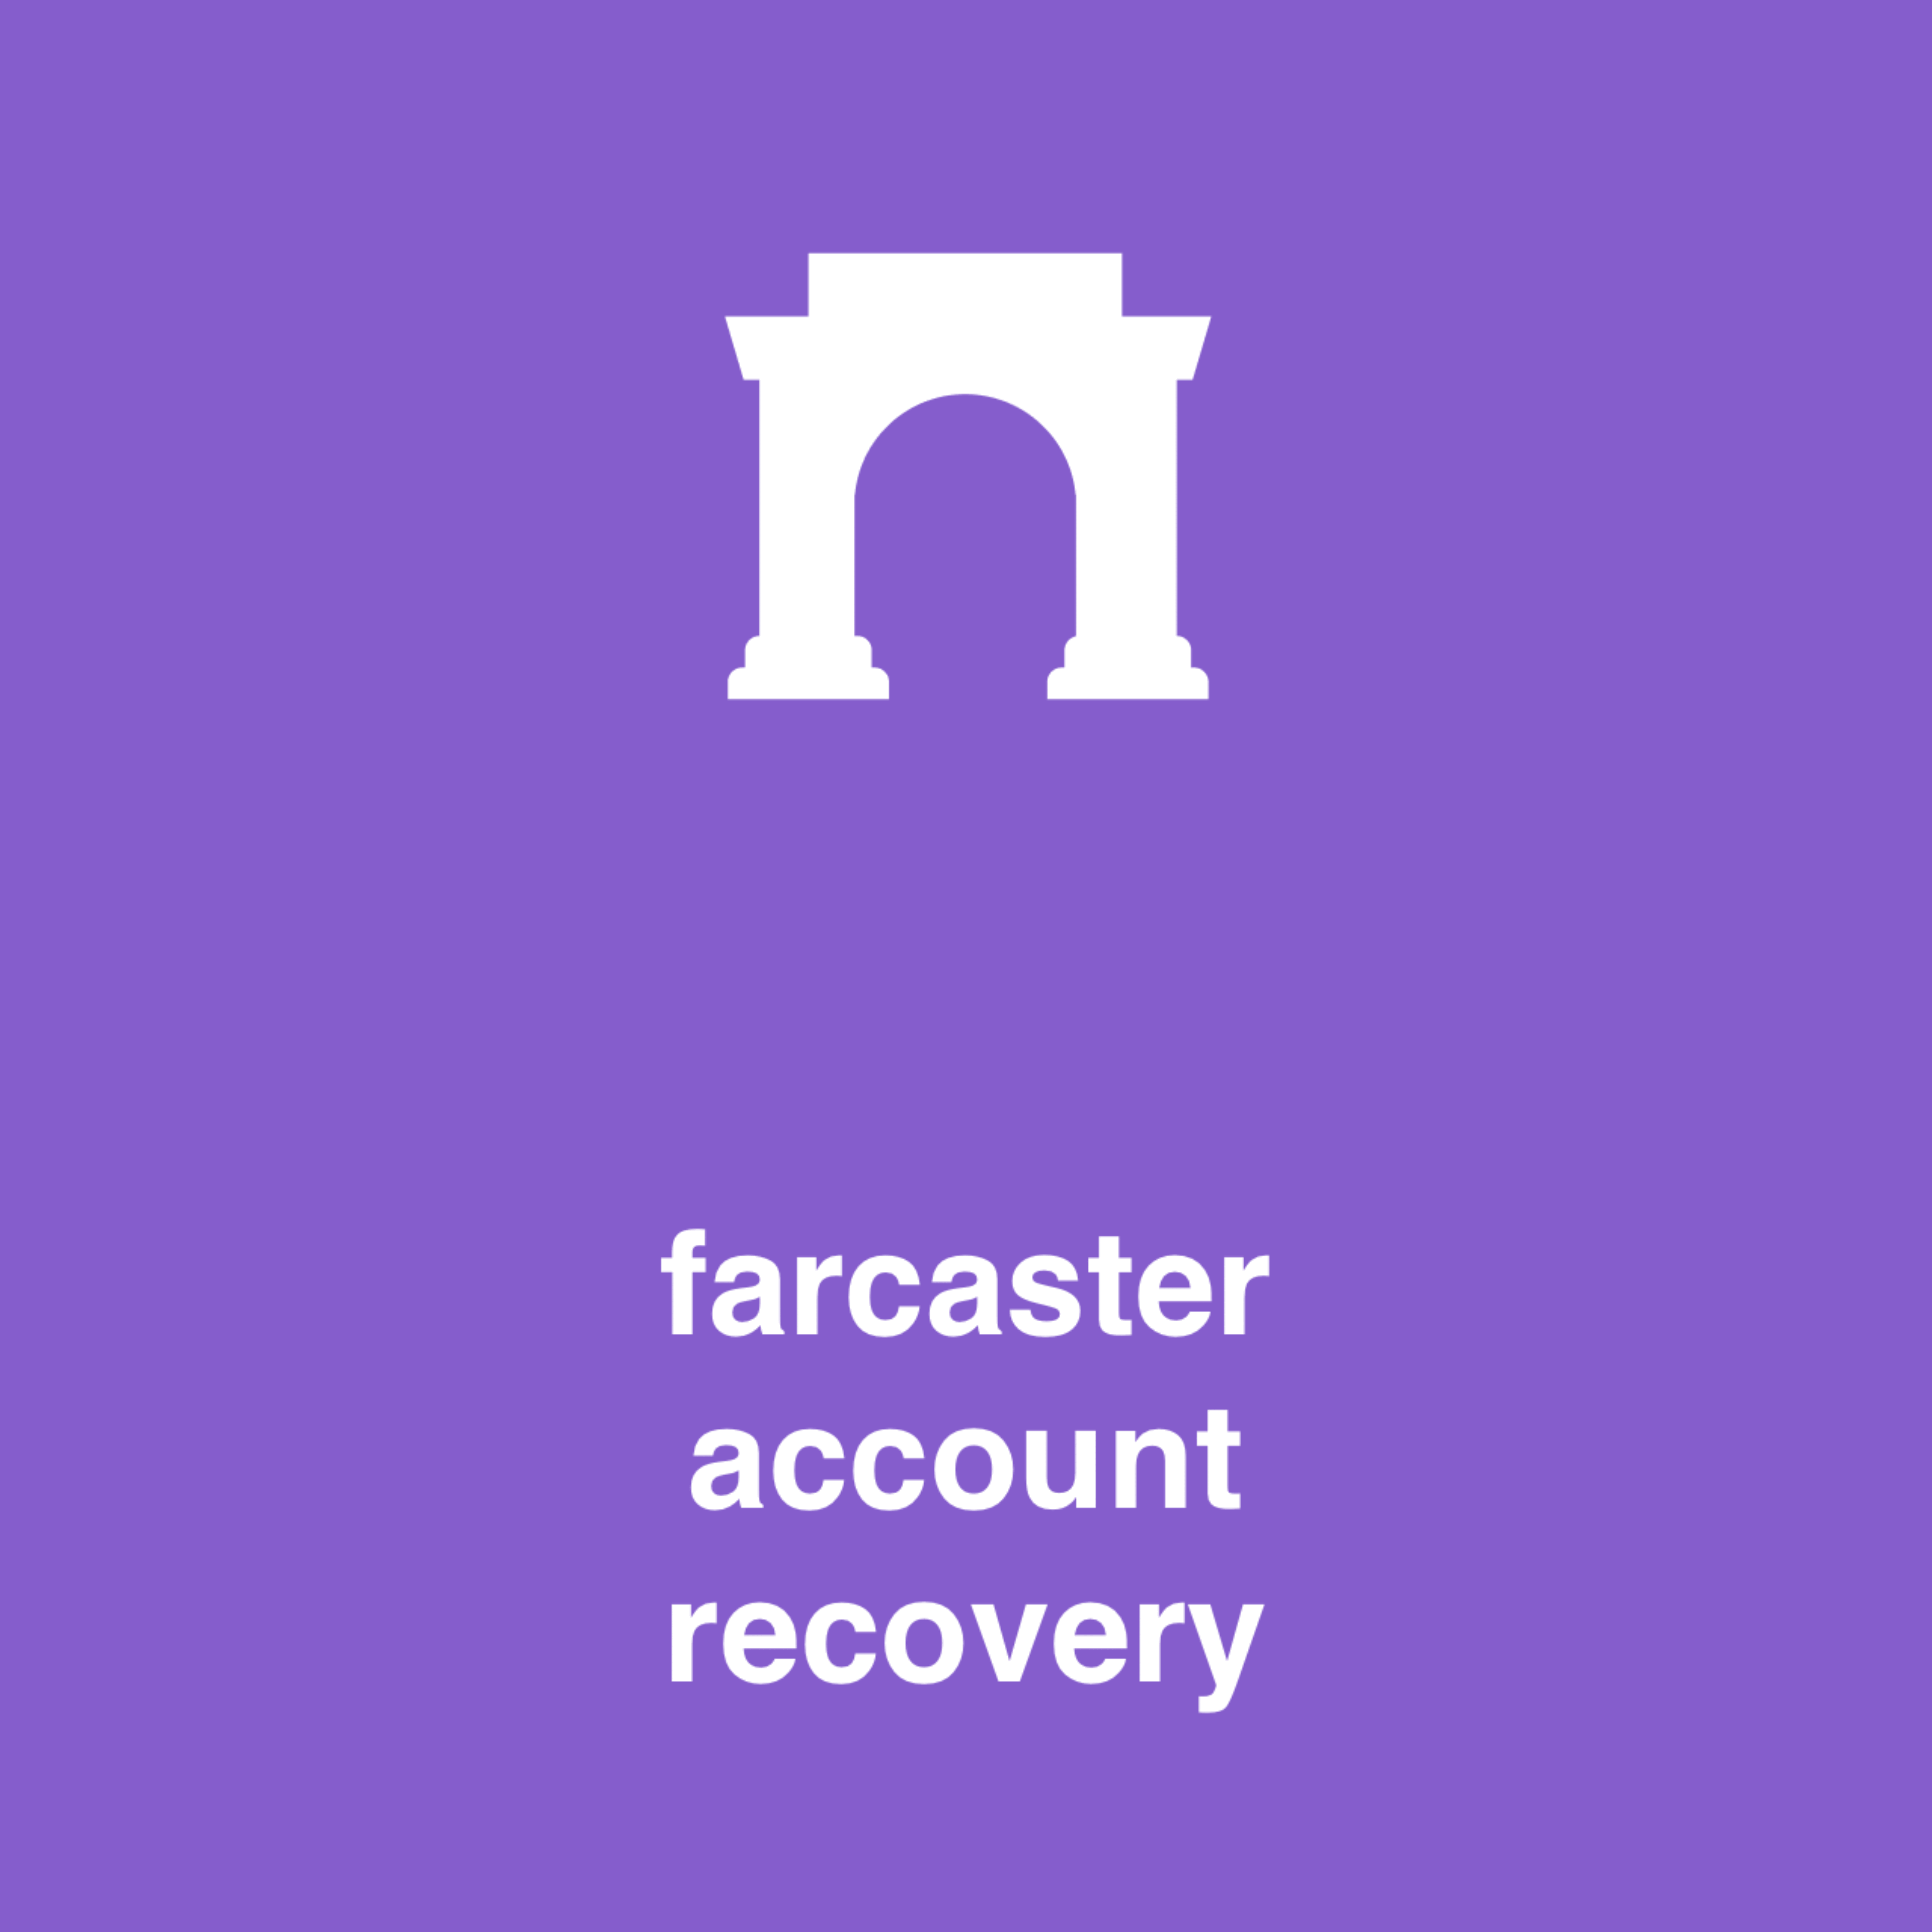 Farcaster account recovery in Warpcast